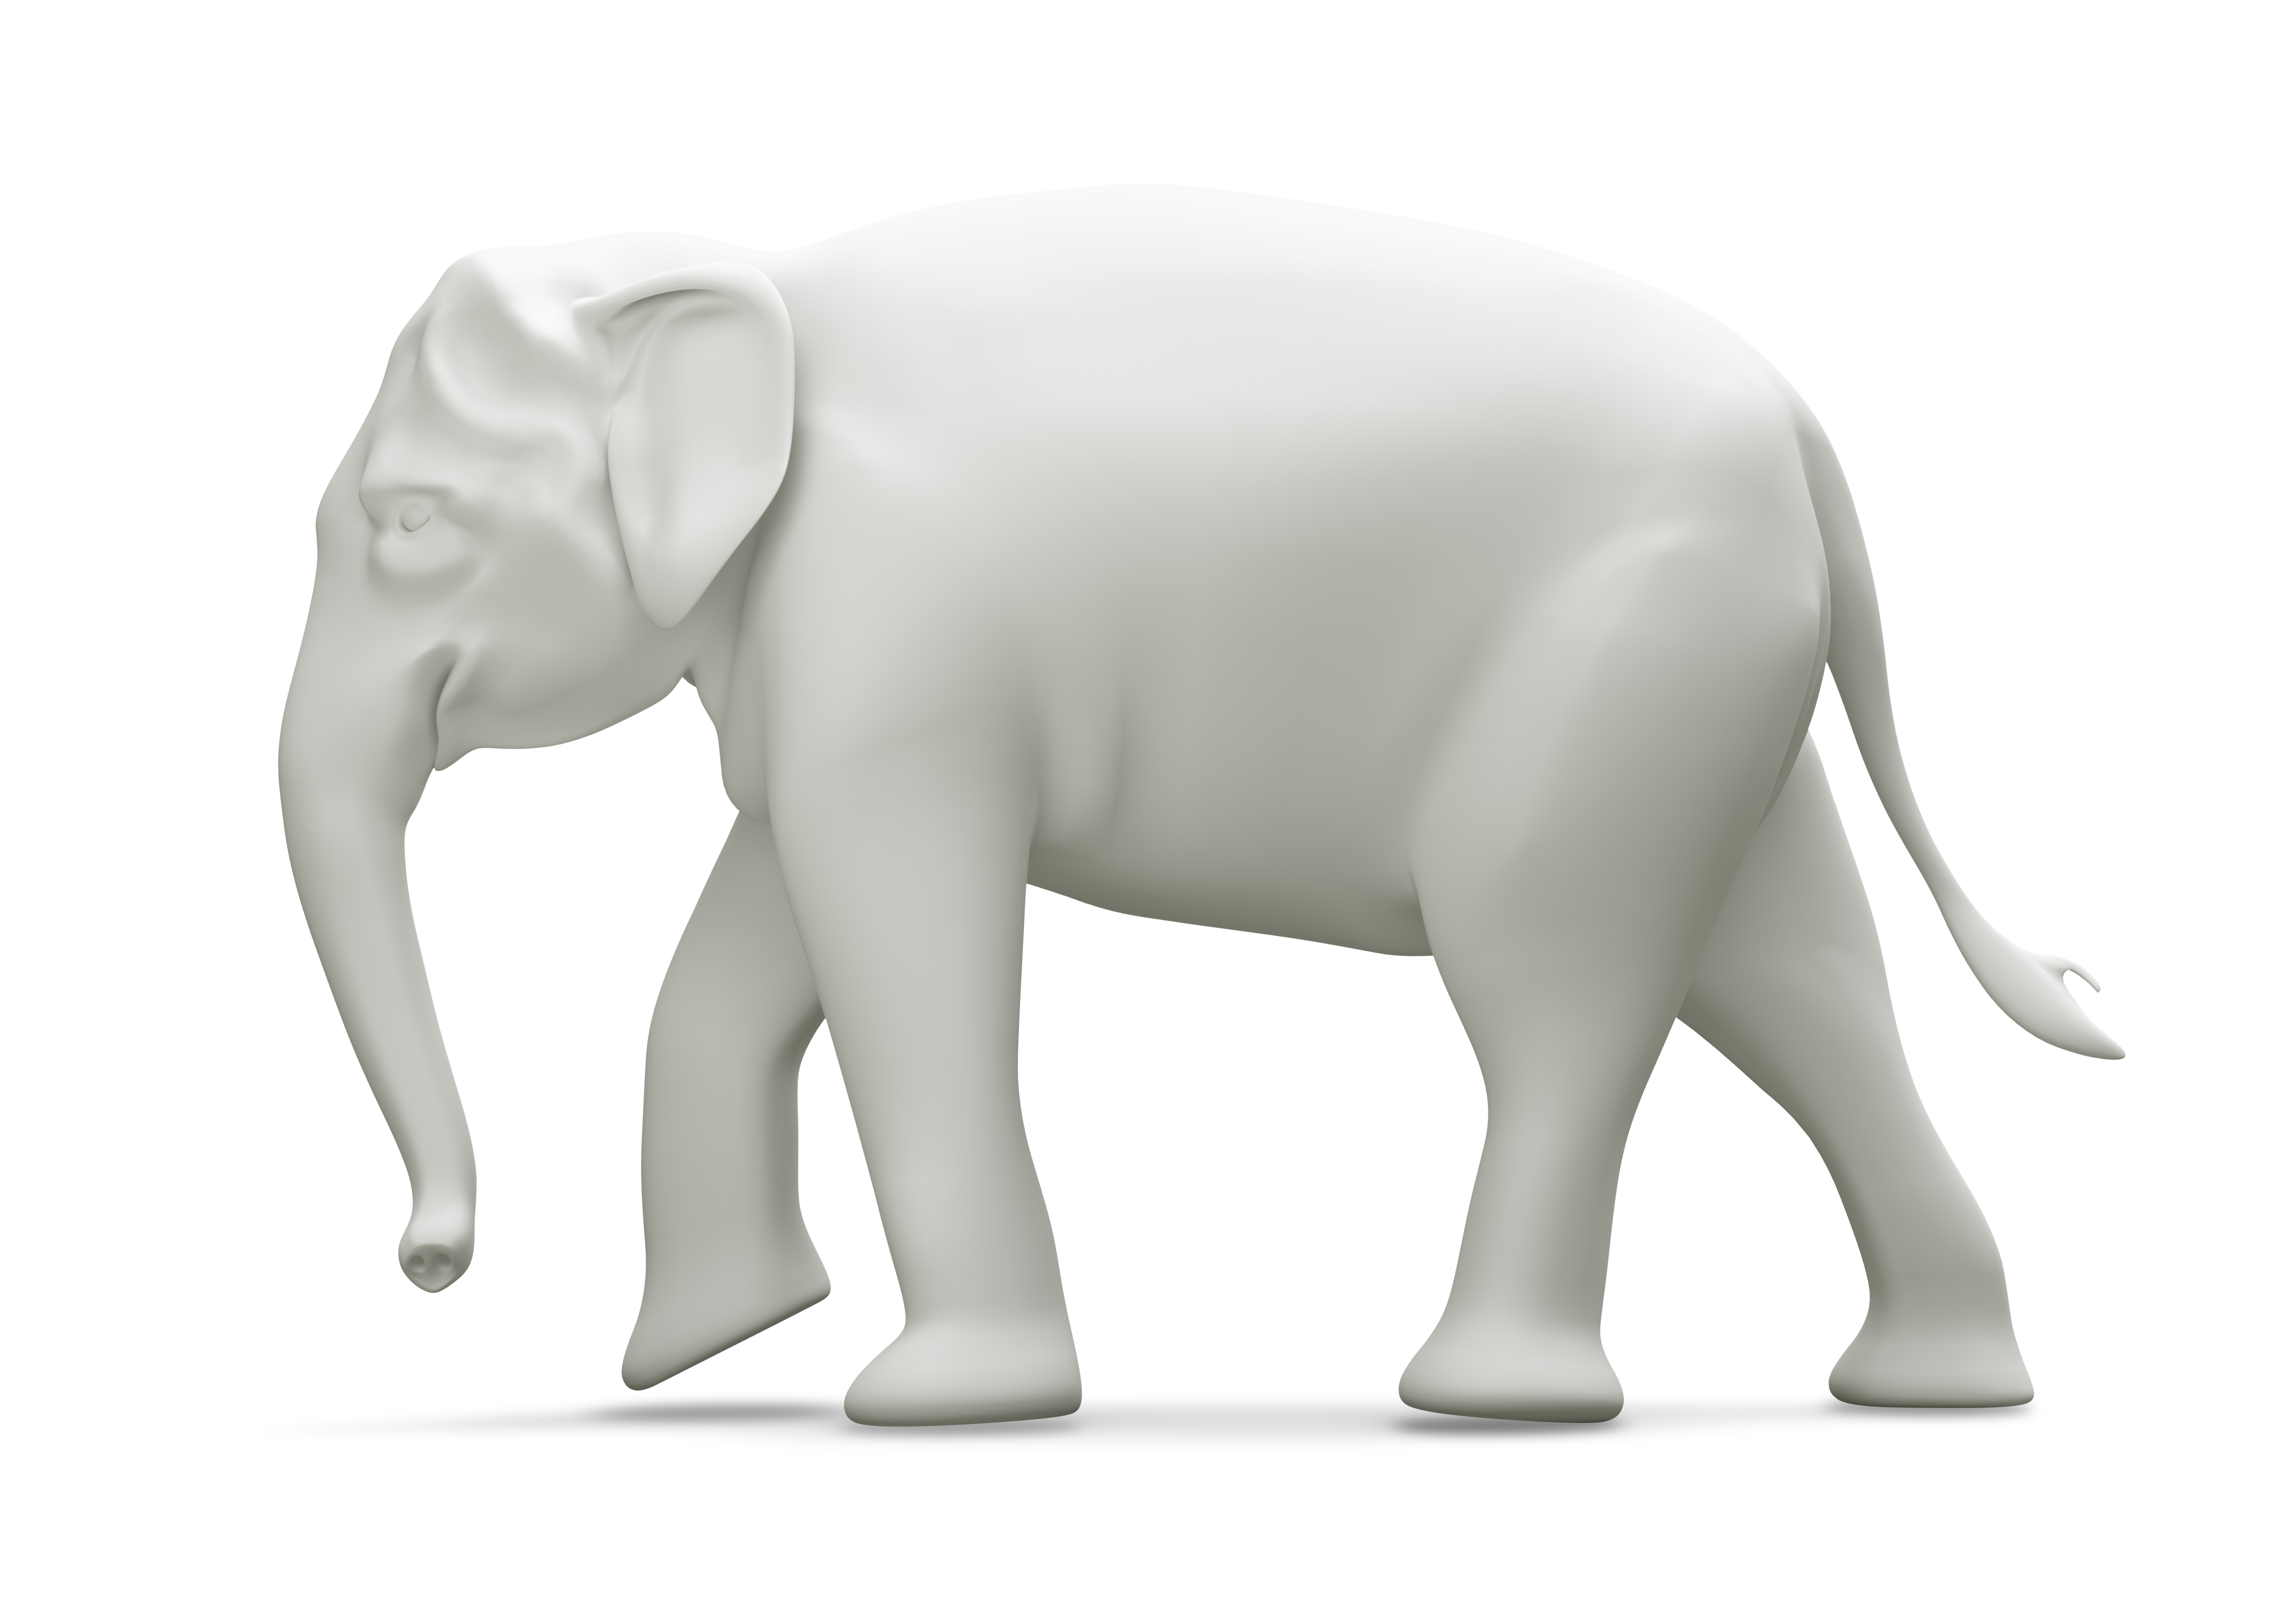 The WHITE elephant in the room – DIVERSITY MATTERS